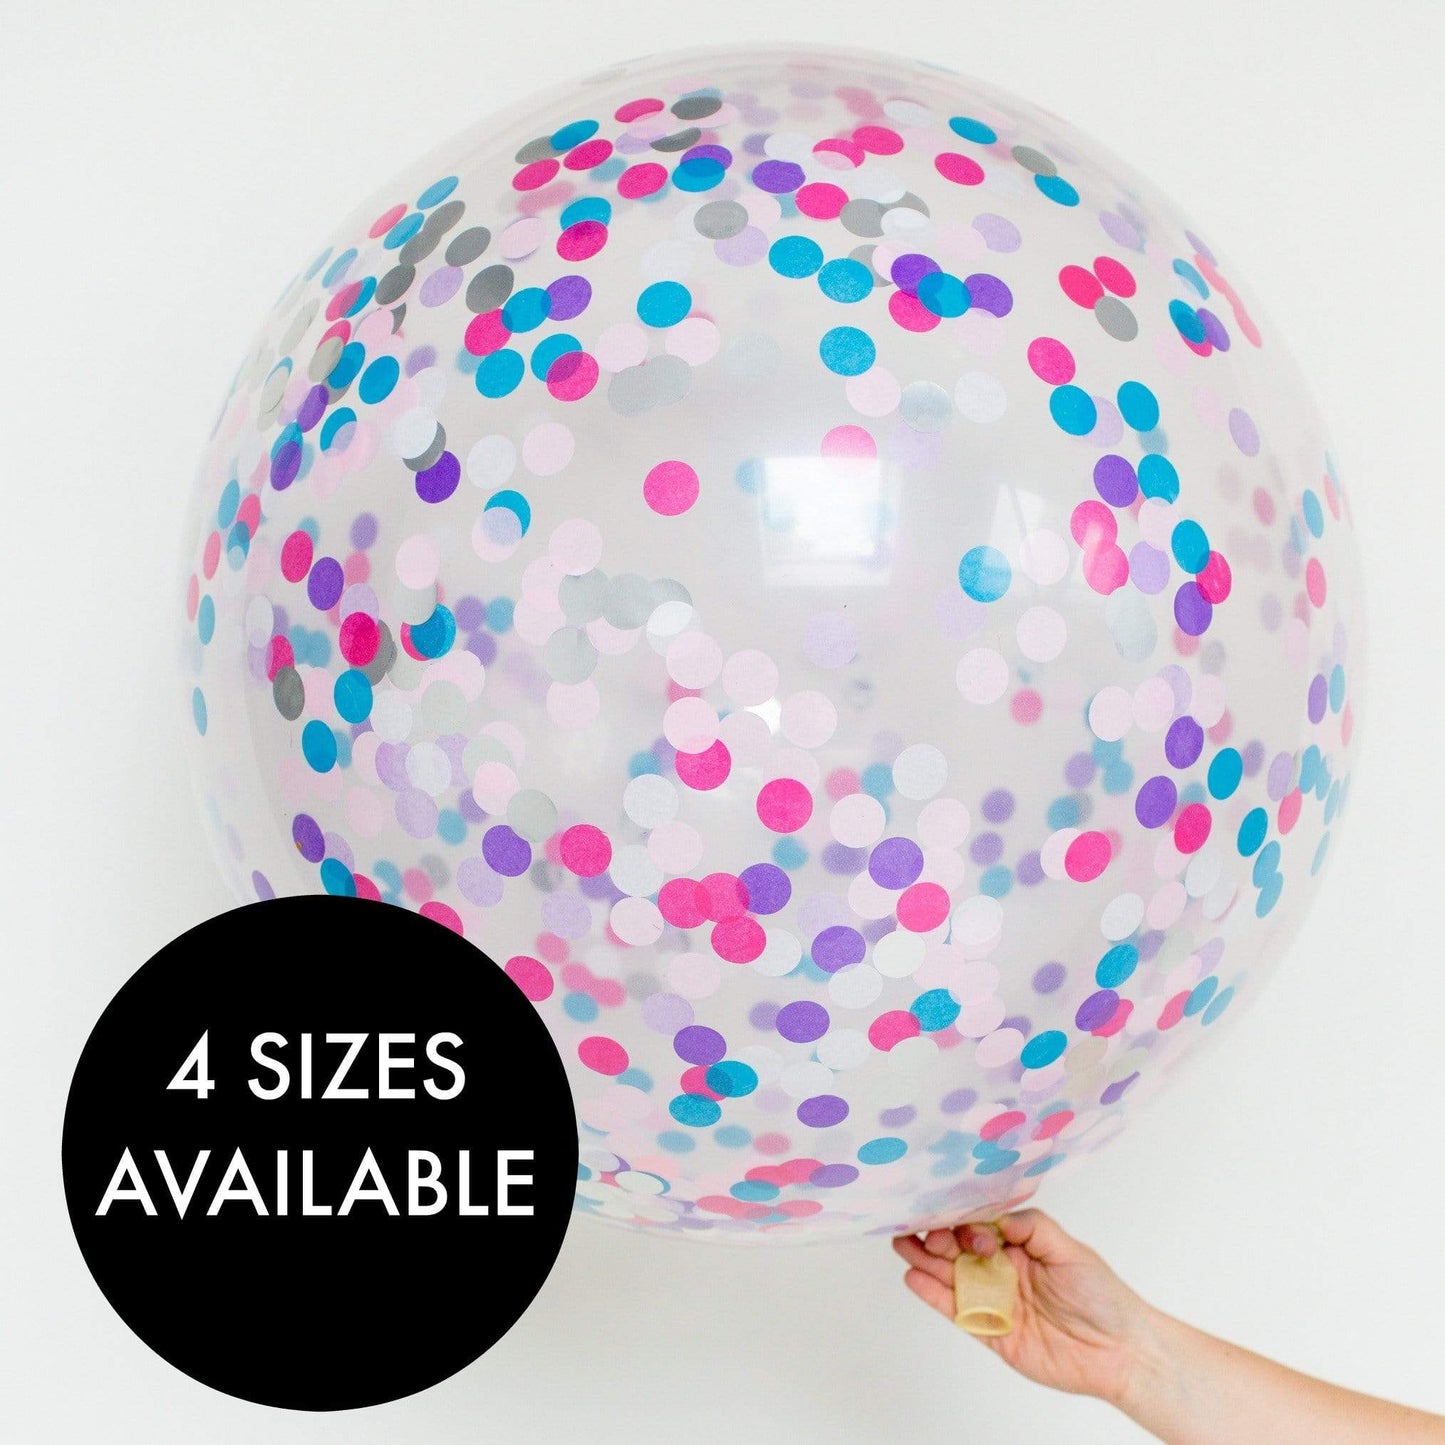 Confetti Balloons | Unicorn Confetti Filled Balloons | Online Balloons Pretty Little Party Shop